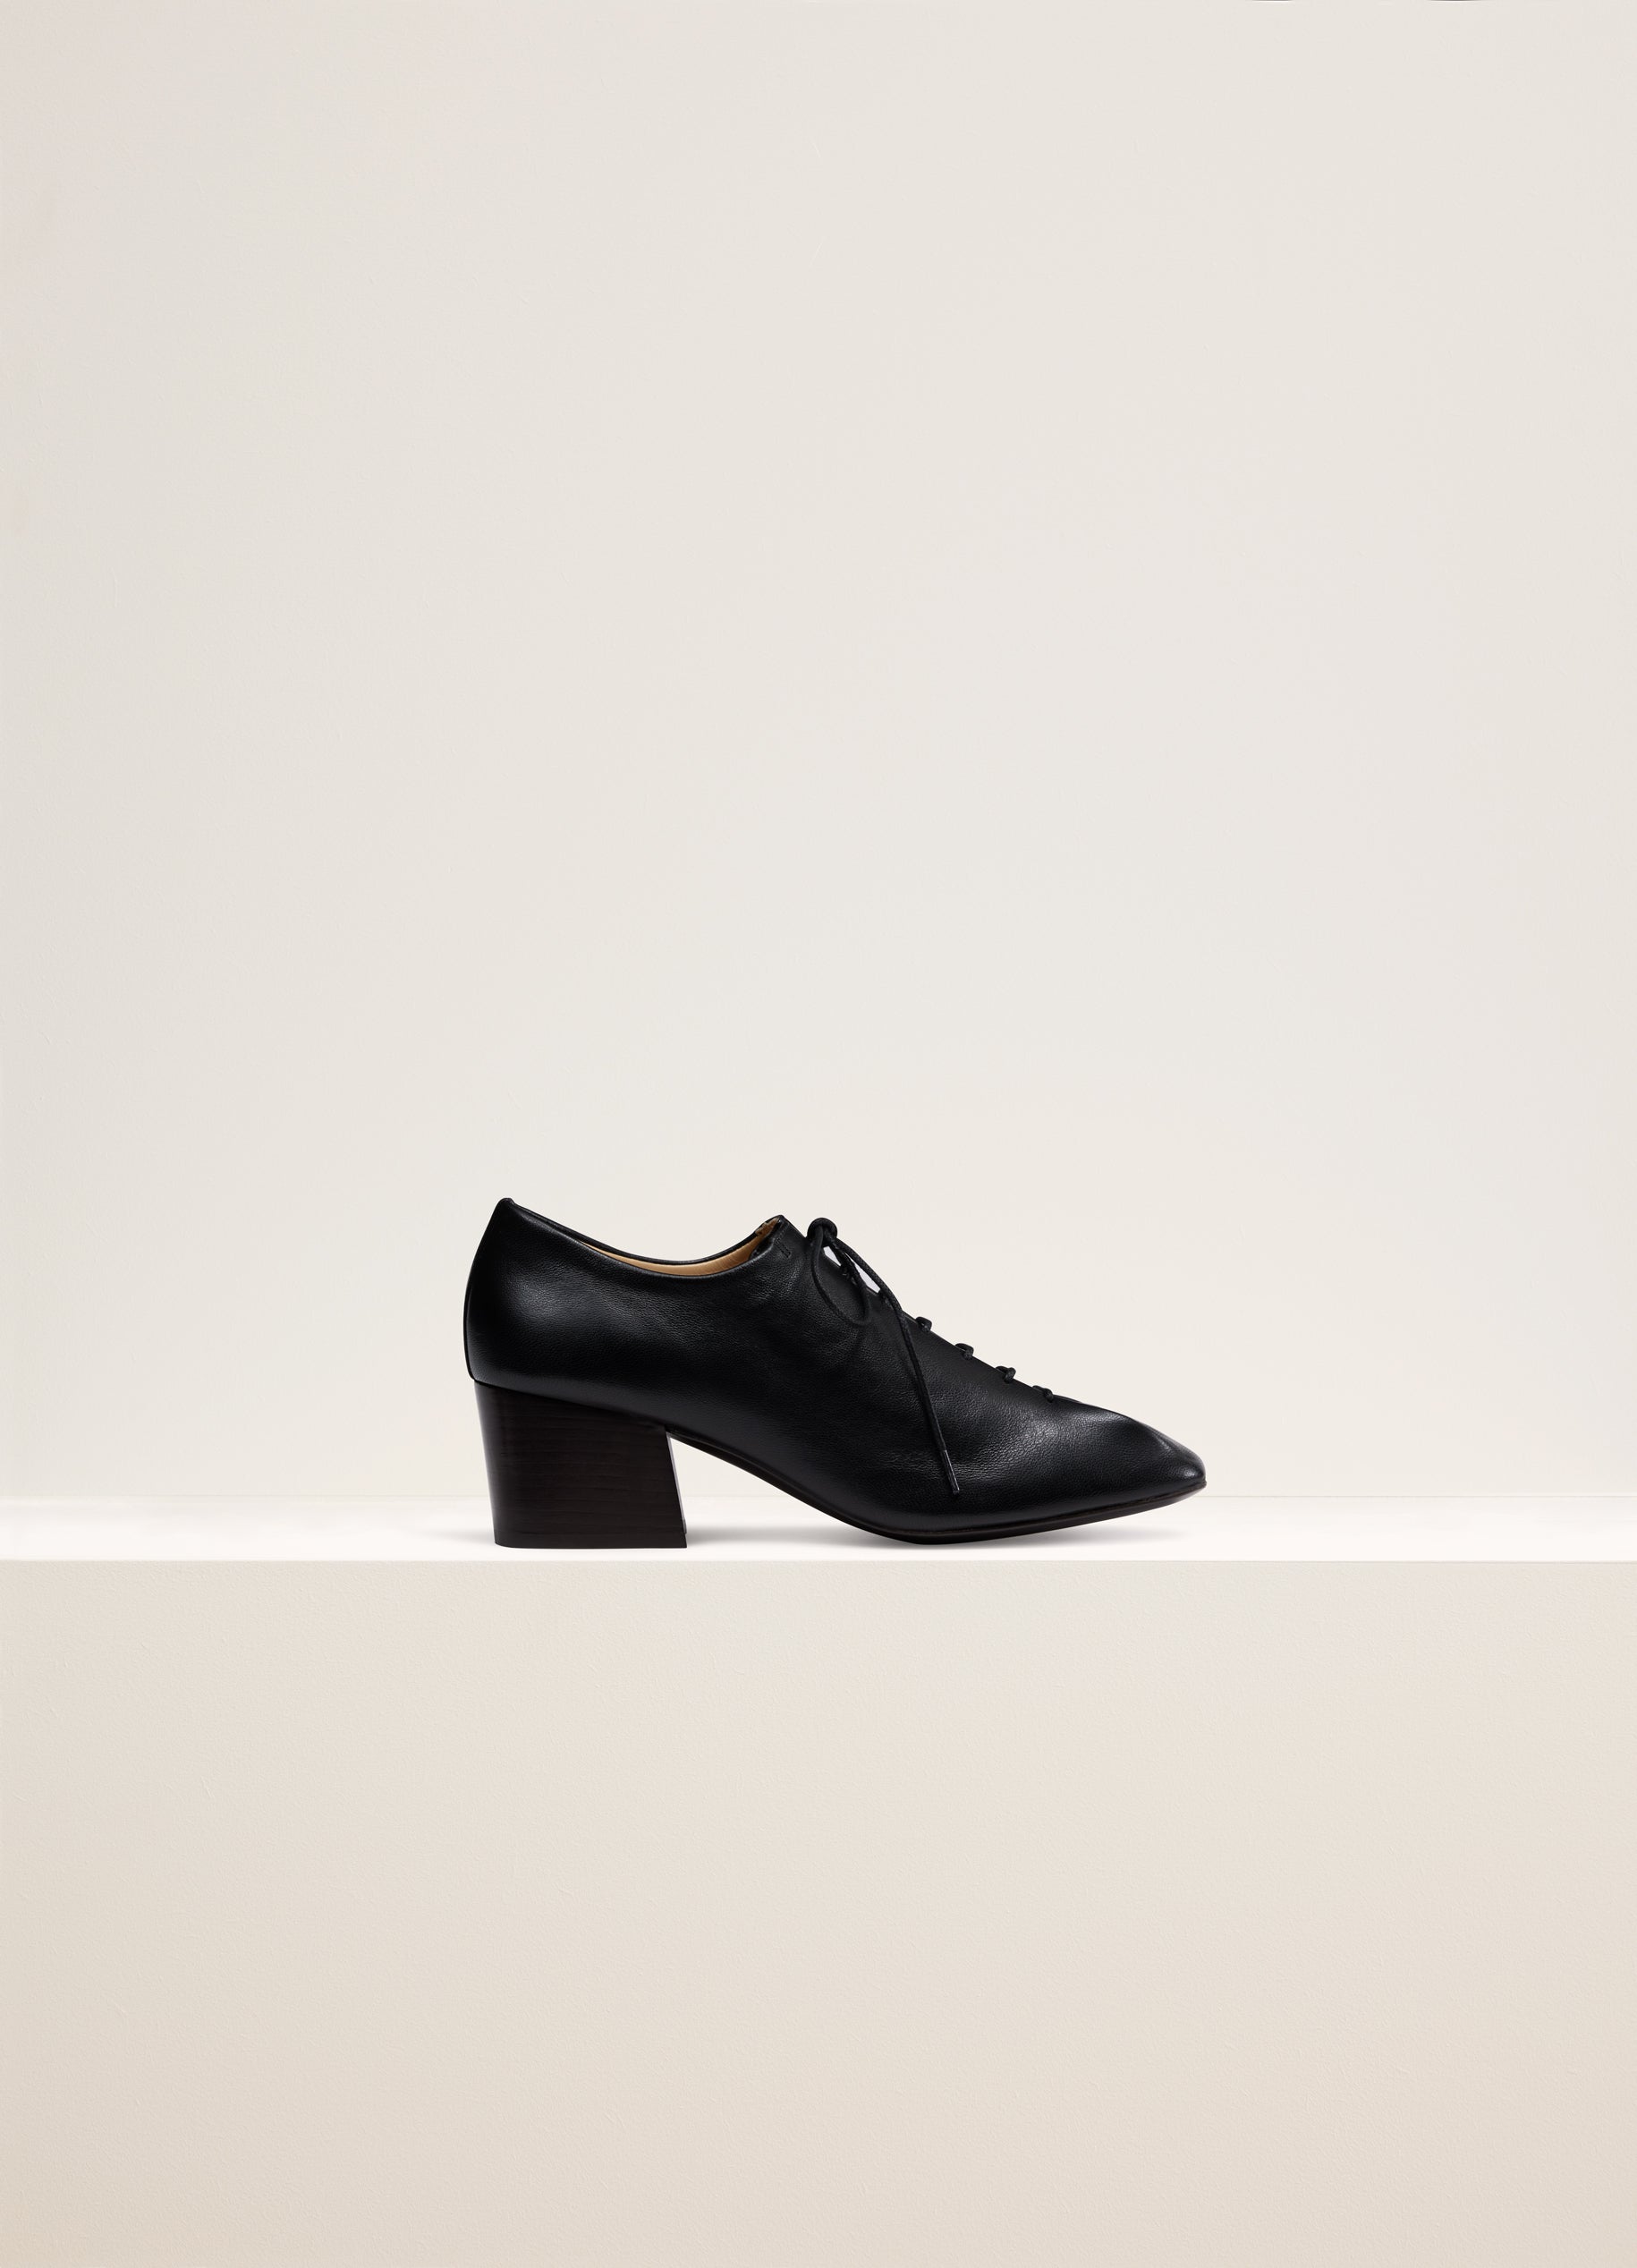 Black Souris Classic Derbies in Shiny Nappa Leather | LEMAIRE